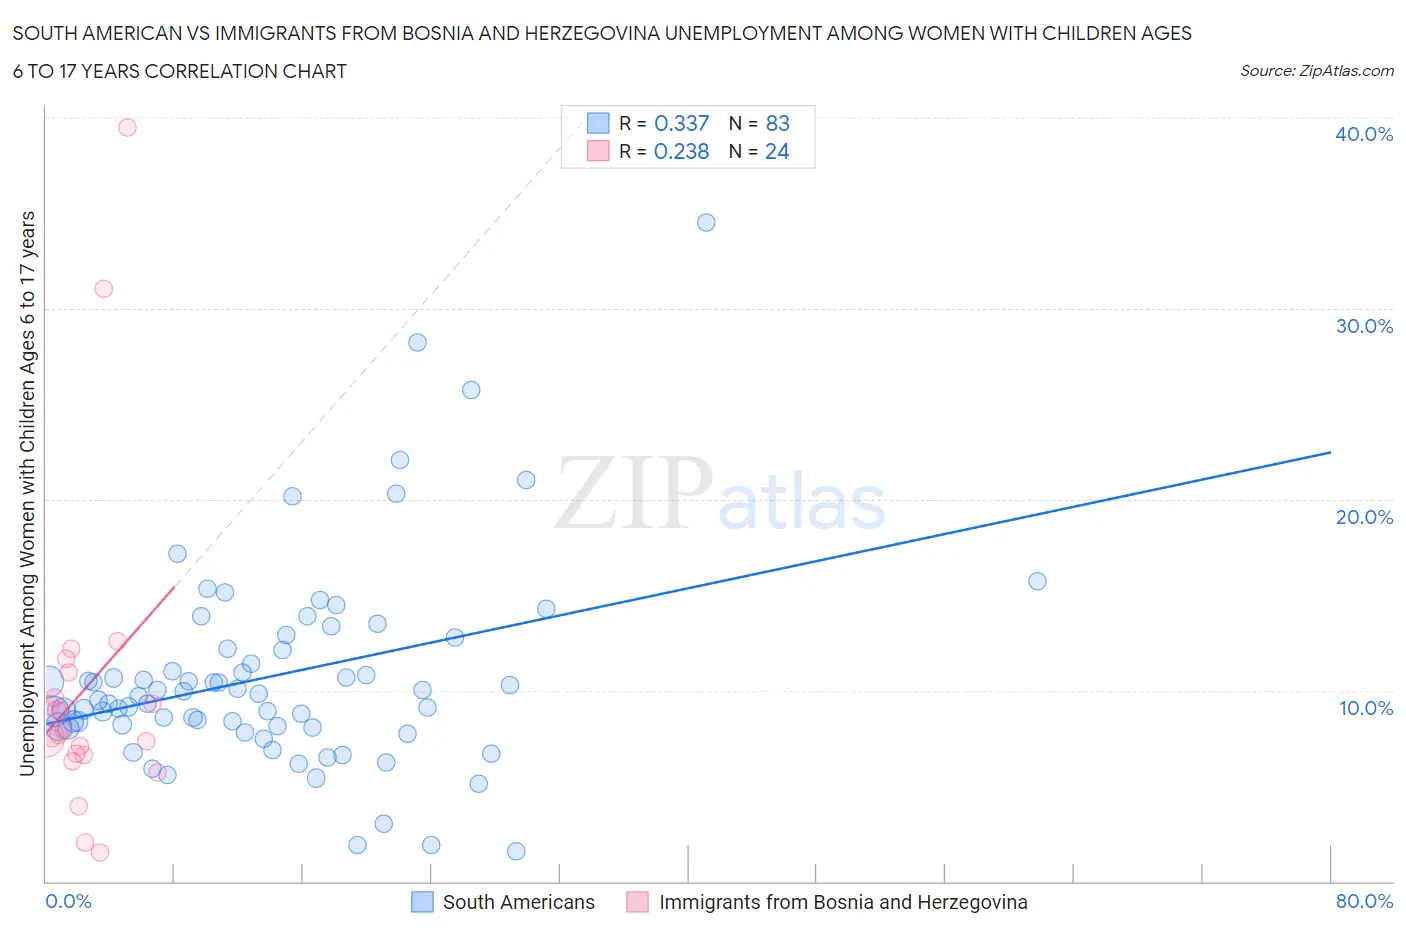 South American vs Immigrants from Bosnia and Herzegovina Unemployment Among Women with Children Ages 6 to 17 years